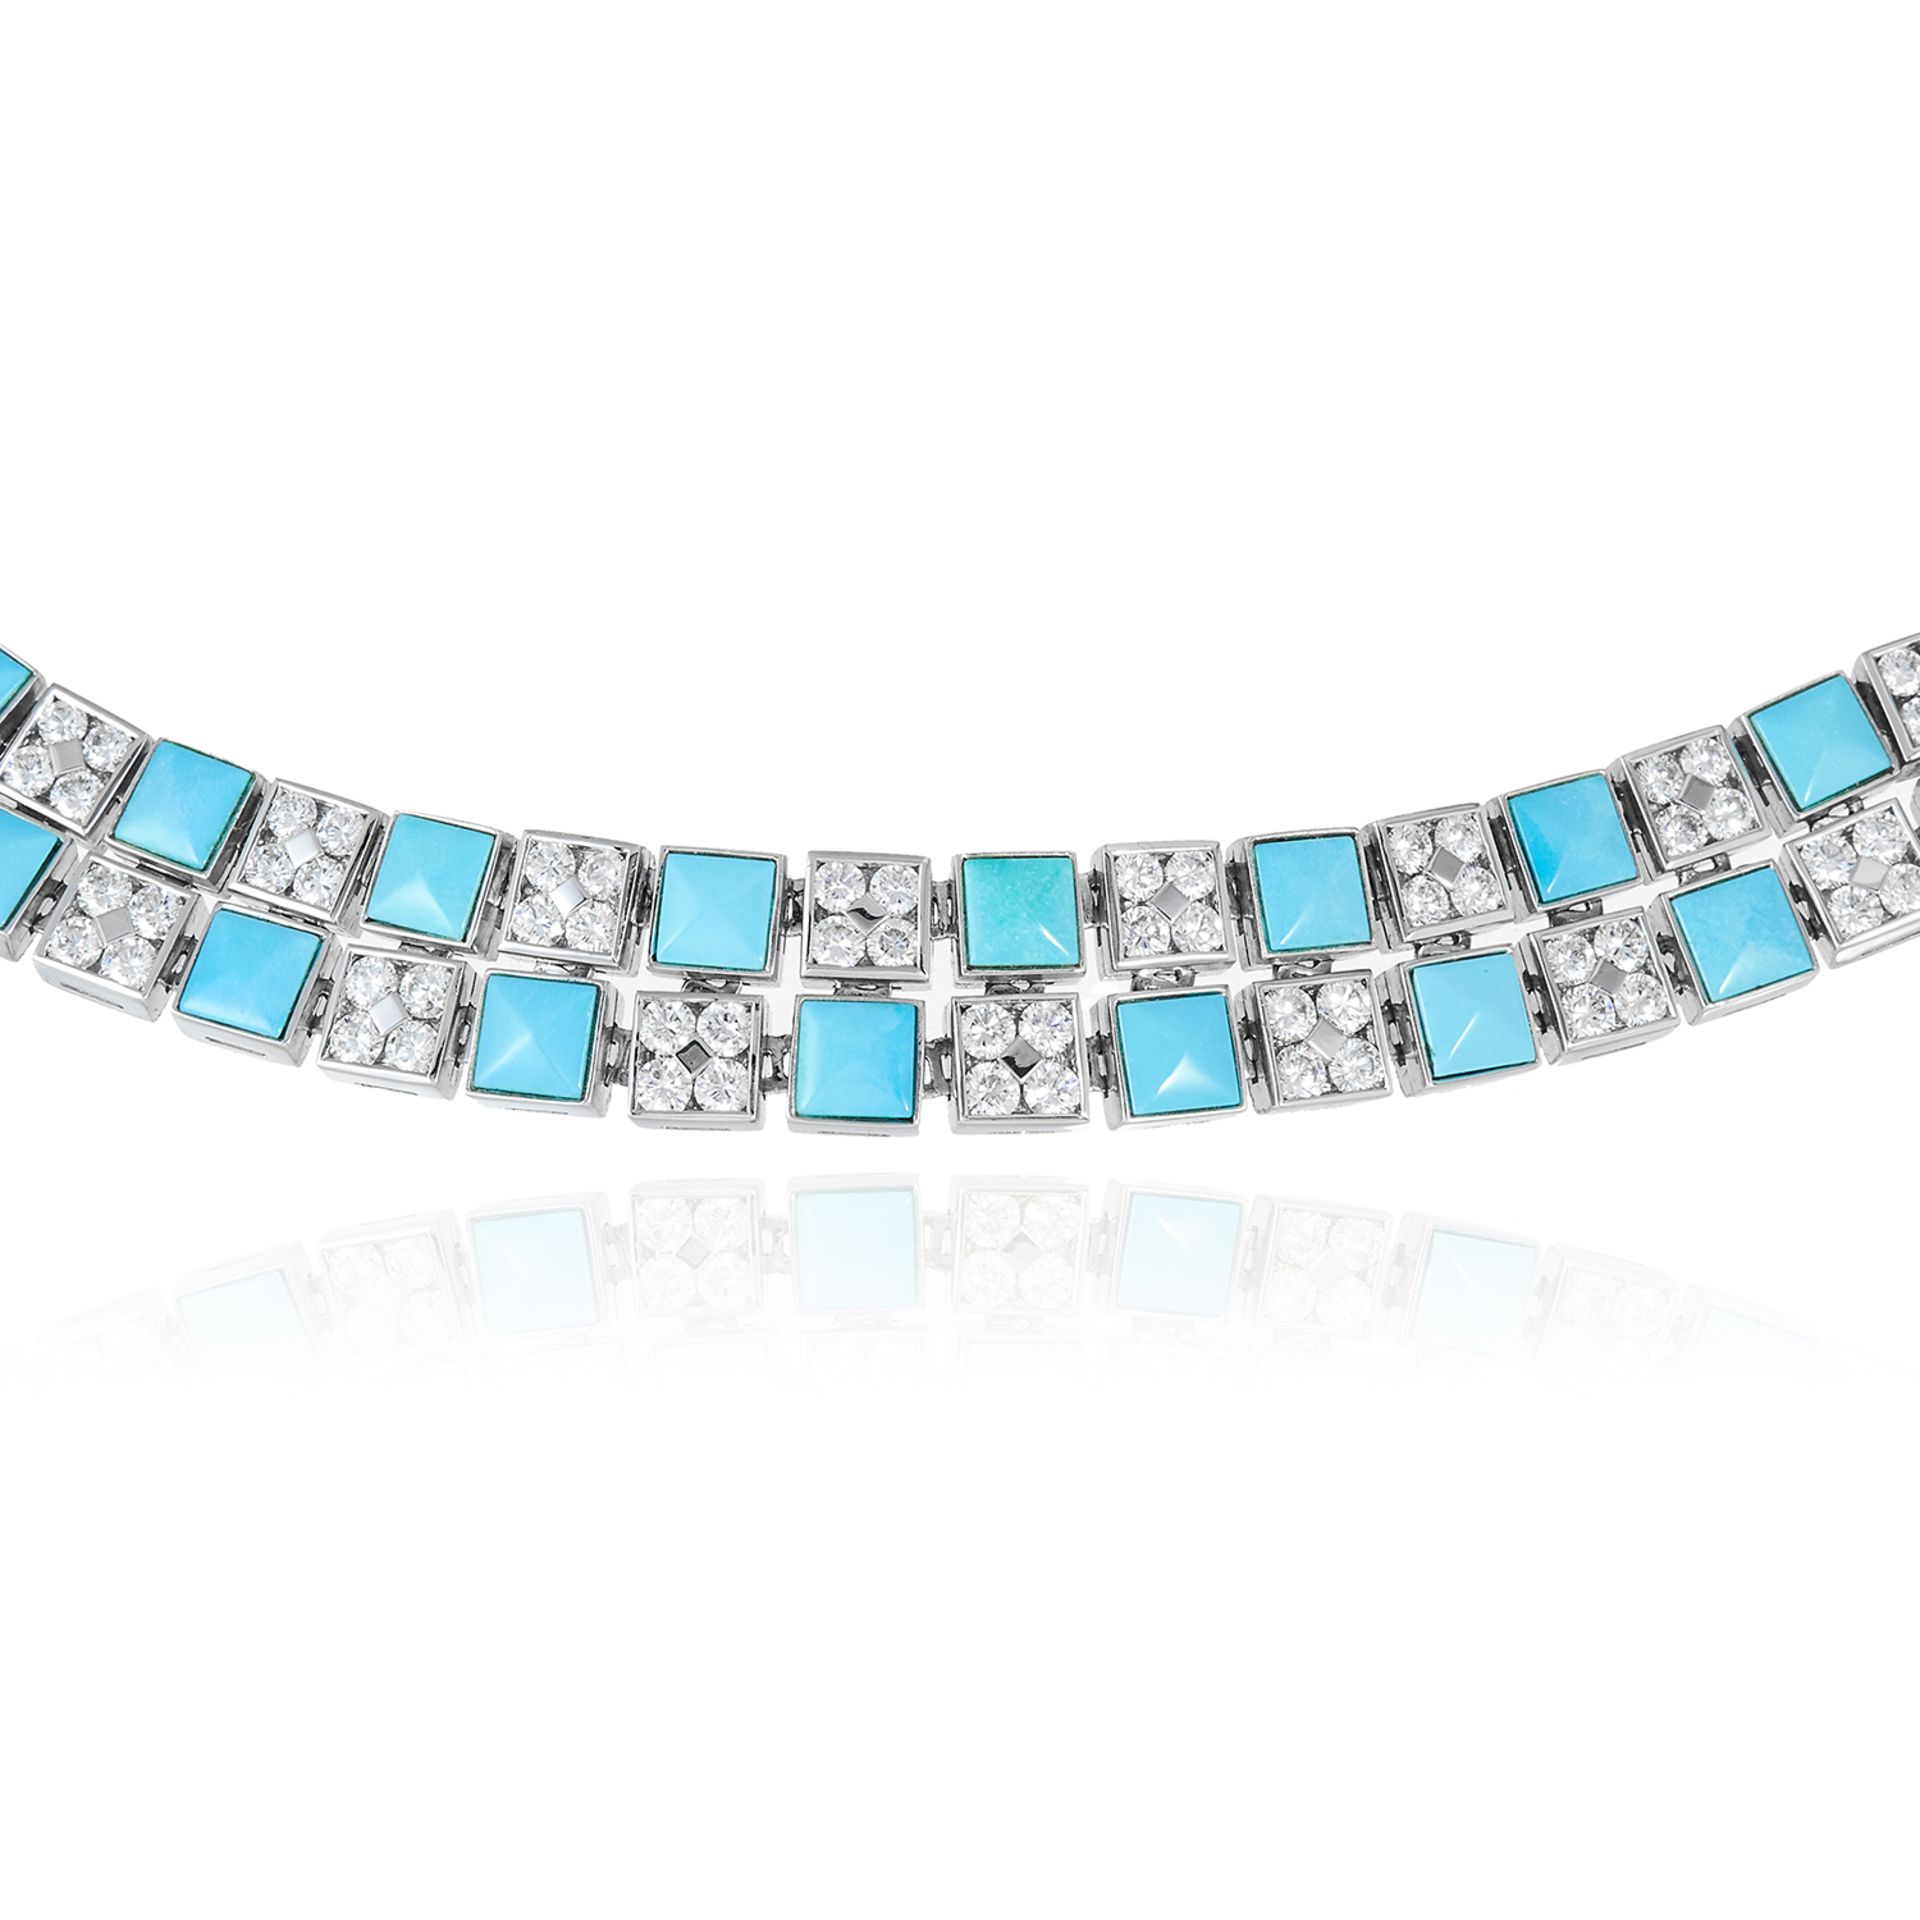 A TURQUOISE AND DIAMOND NECKLACE, PICCHIOTTI in 18ct white gold, formed as a double row of alternat